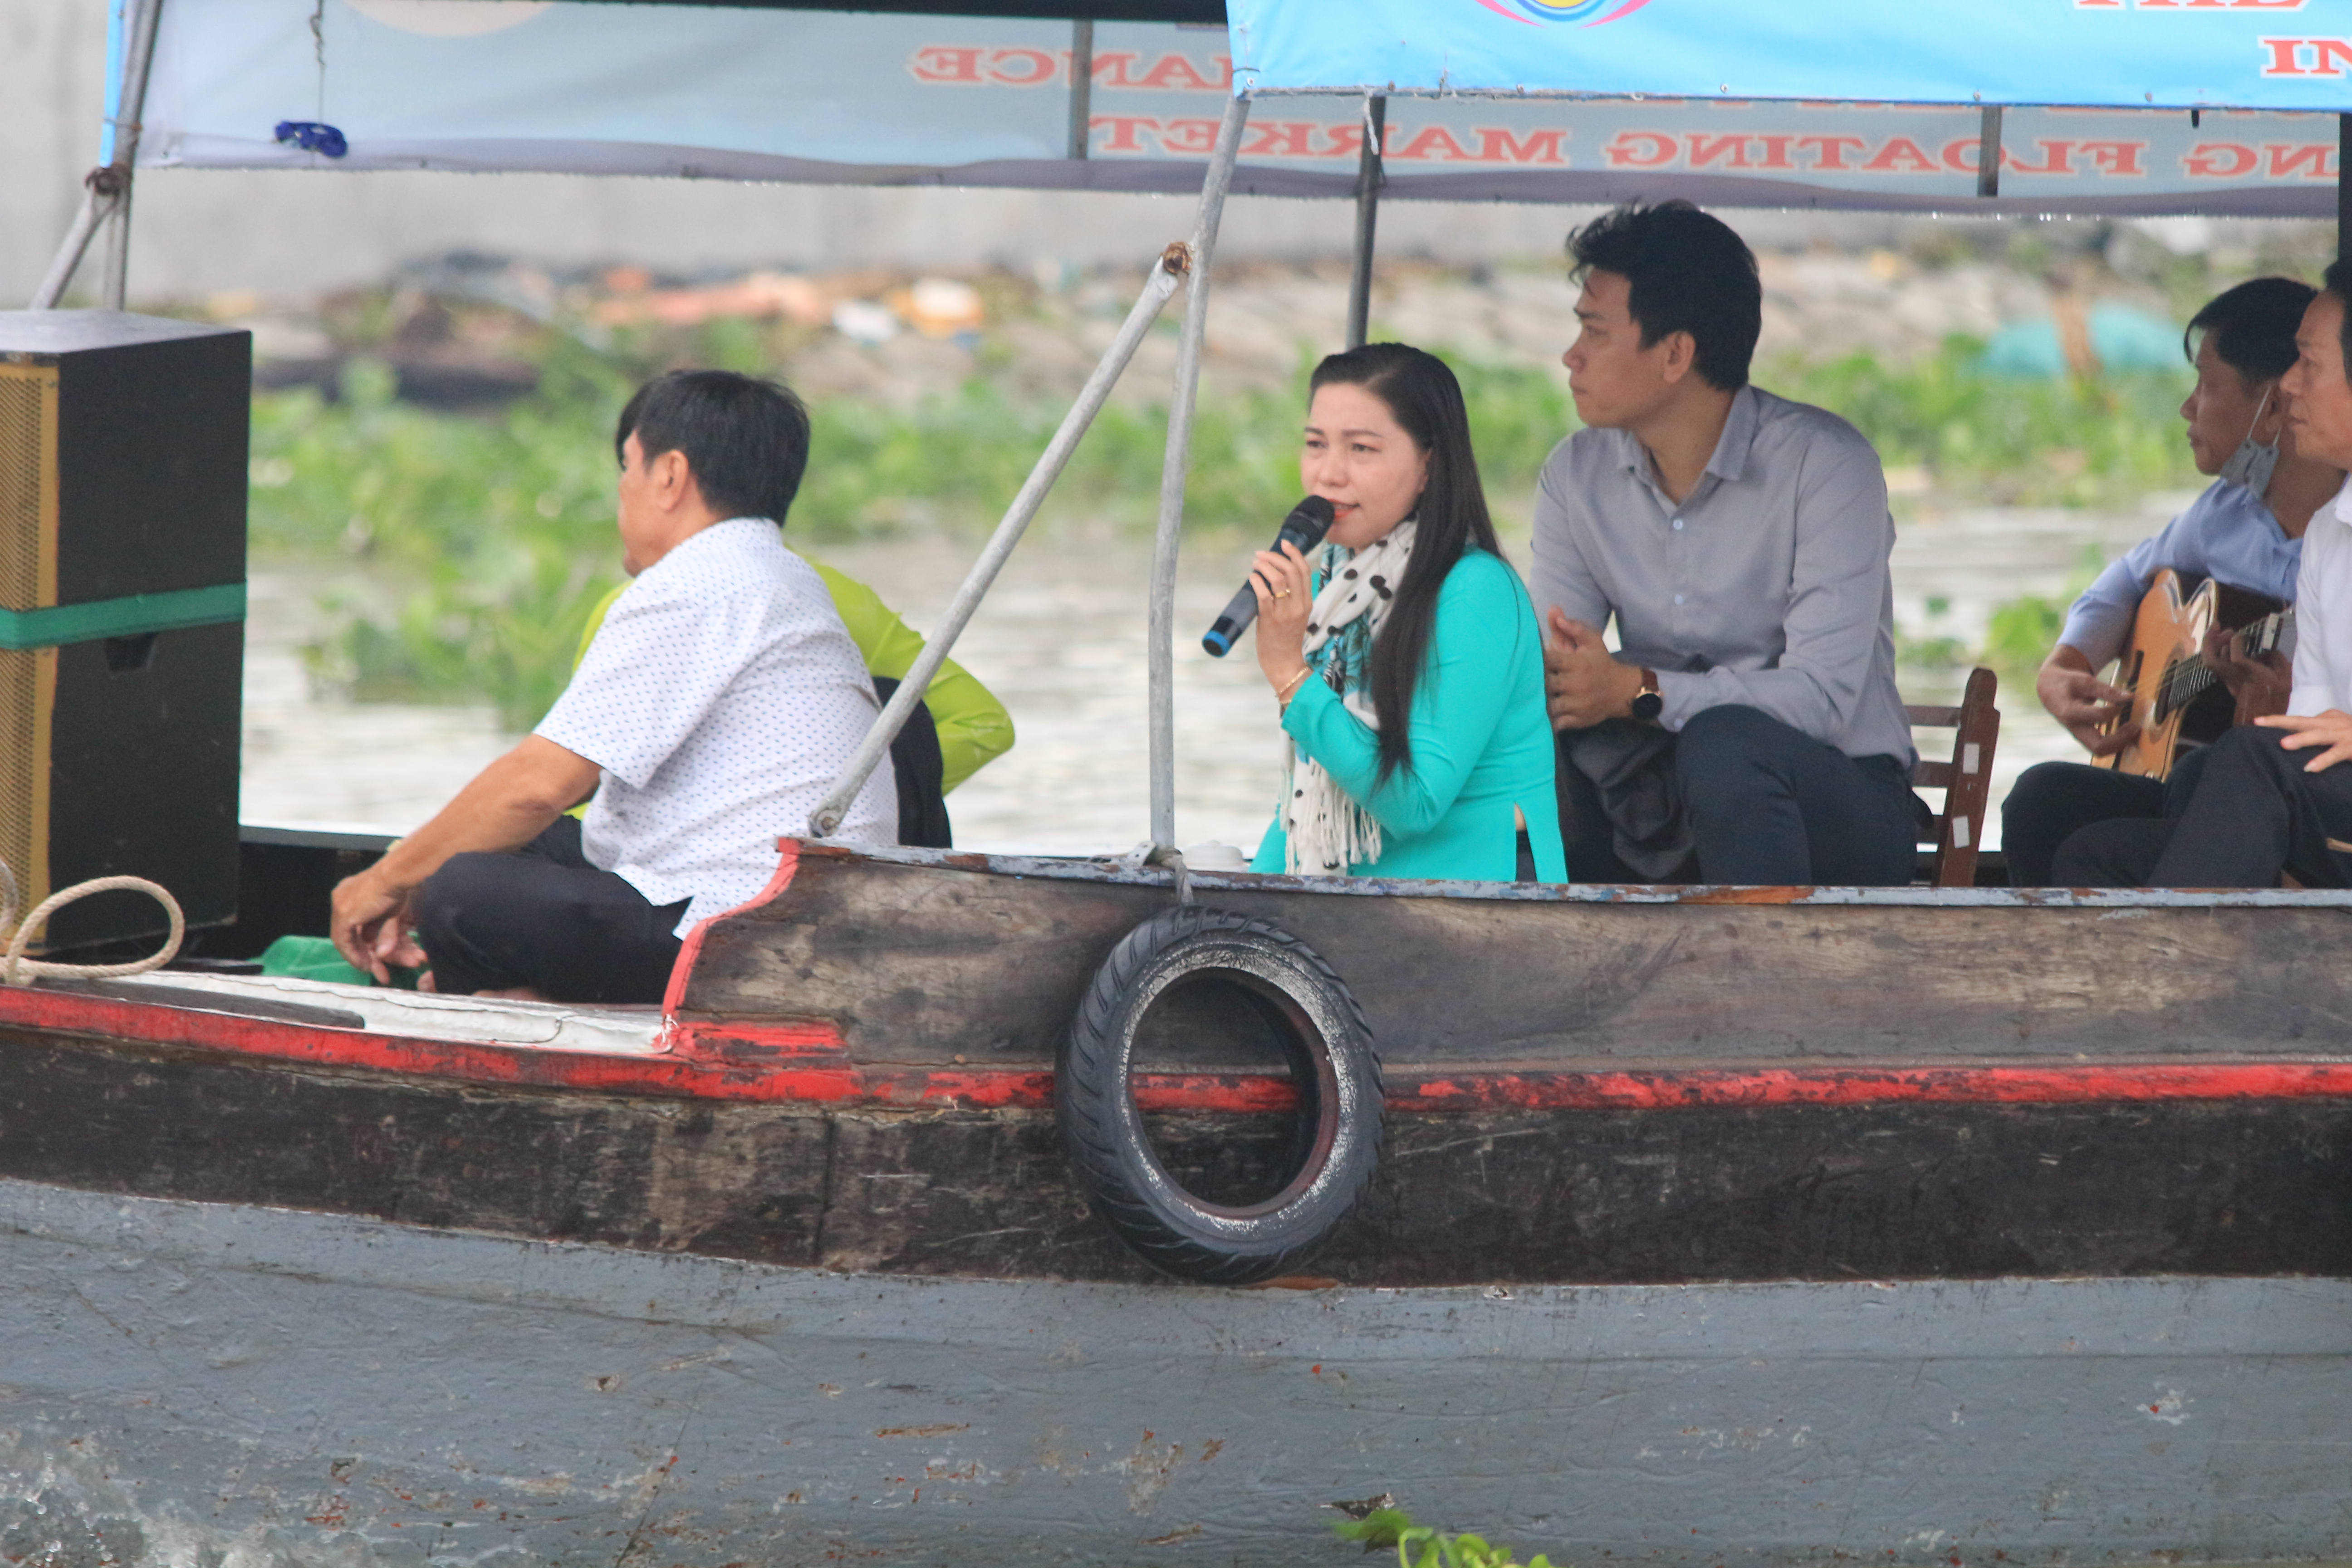 A singer performs for tourists to the Cai Rang Floating Market in Can Tho City, southern Vietnam. Photo: Ray Kuschert / Tuoi Tre News